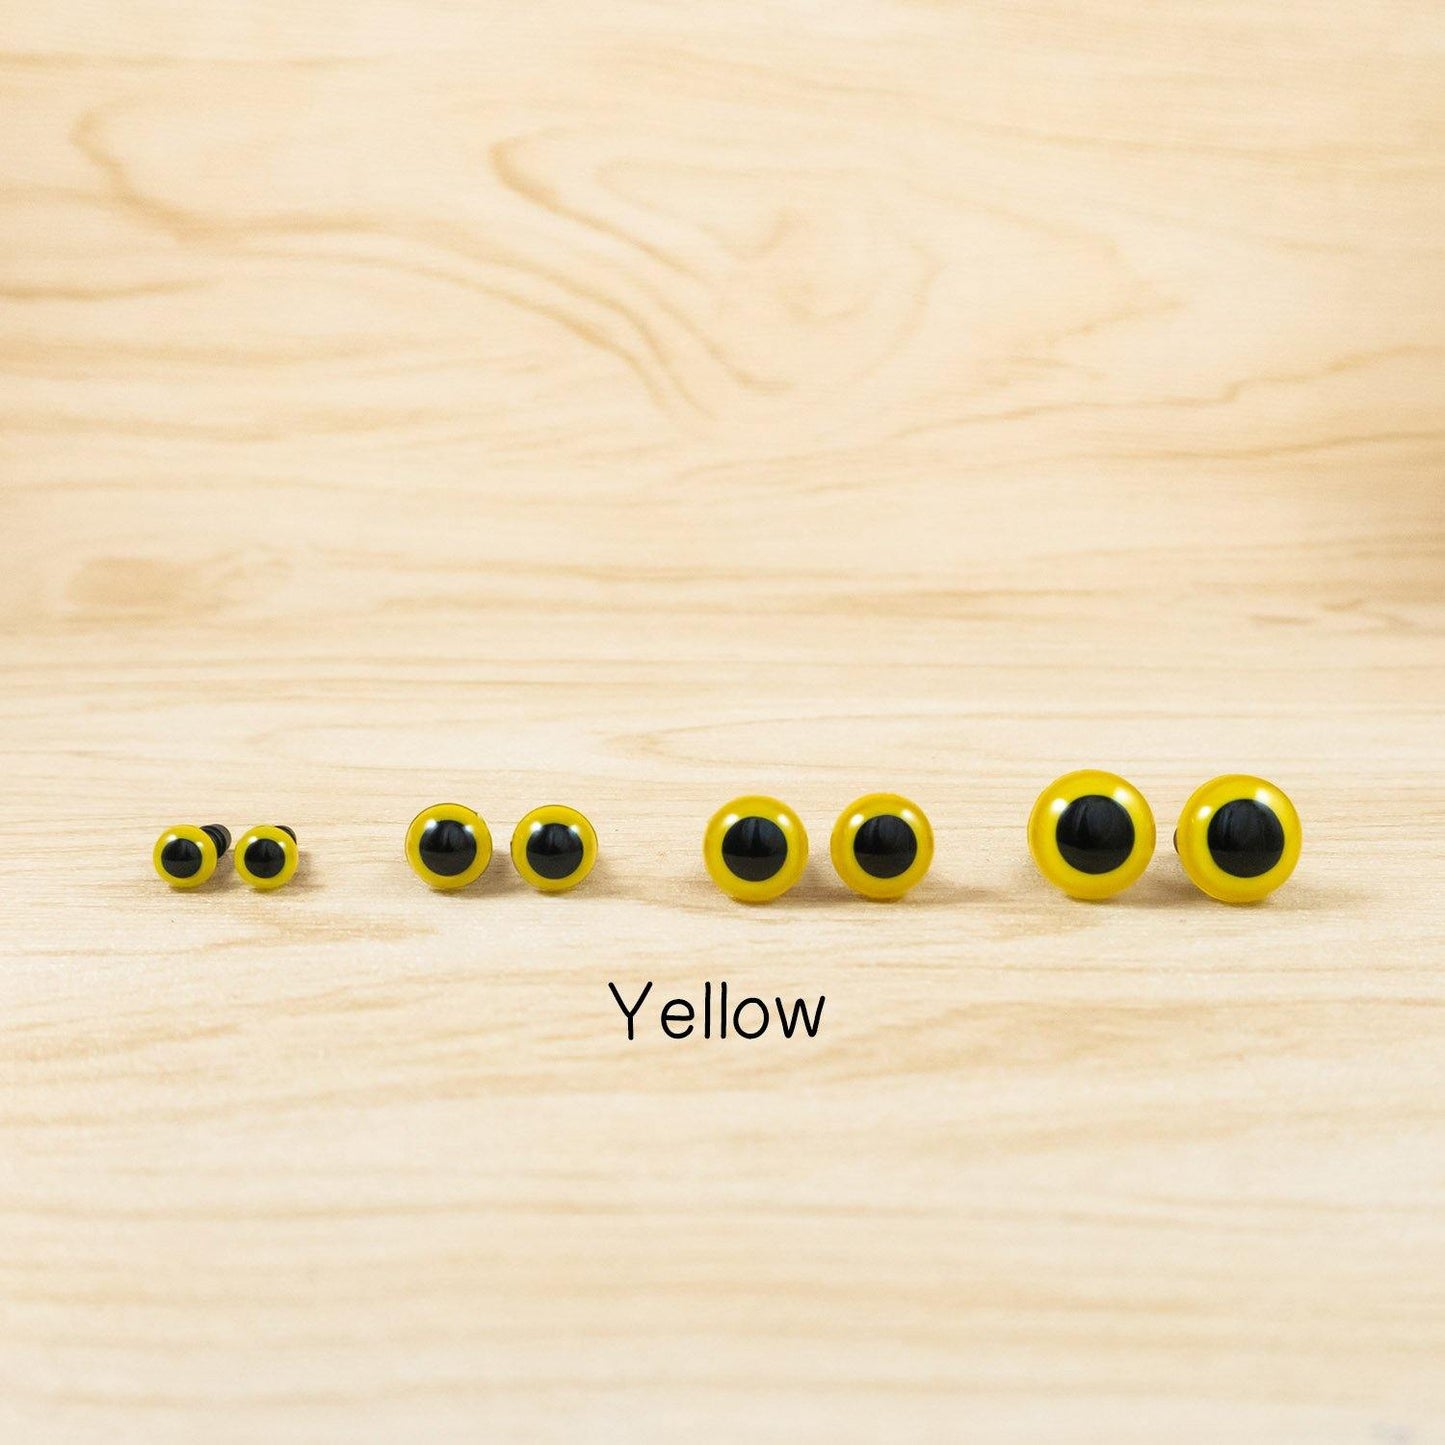 Yellow Safety eyes for handmade craft stuffed animals - 6mm, 8mm, 10mm, 12mm